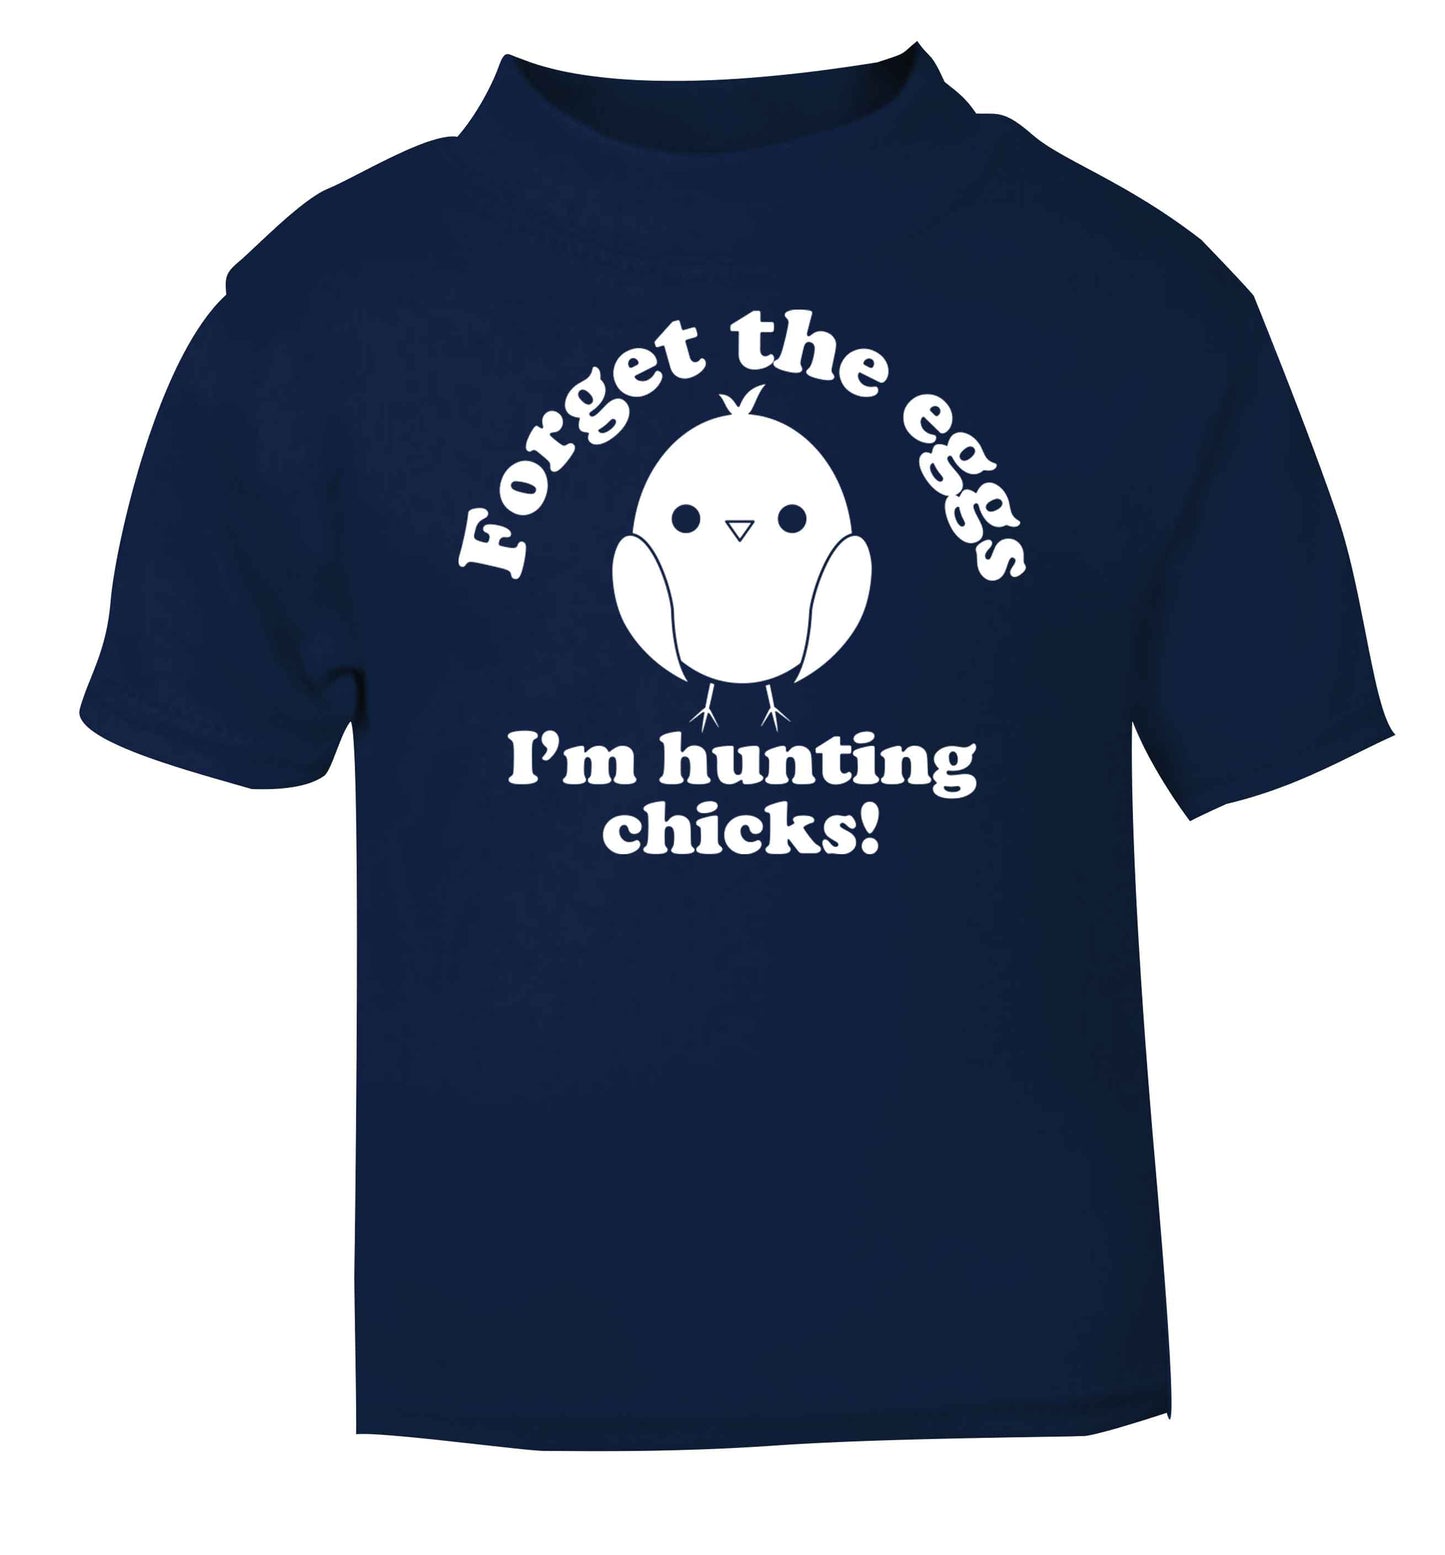 Forget the eggs I'm hunting chicks! navy baby toddler Tshirt 2 Years